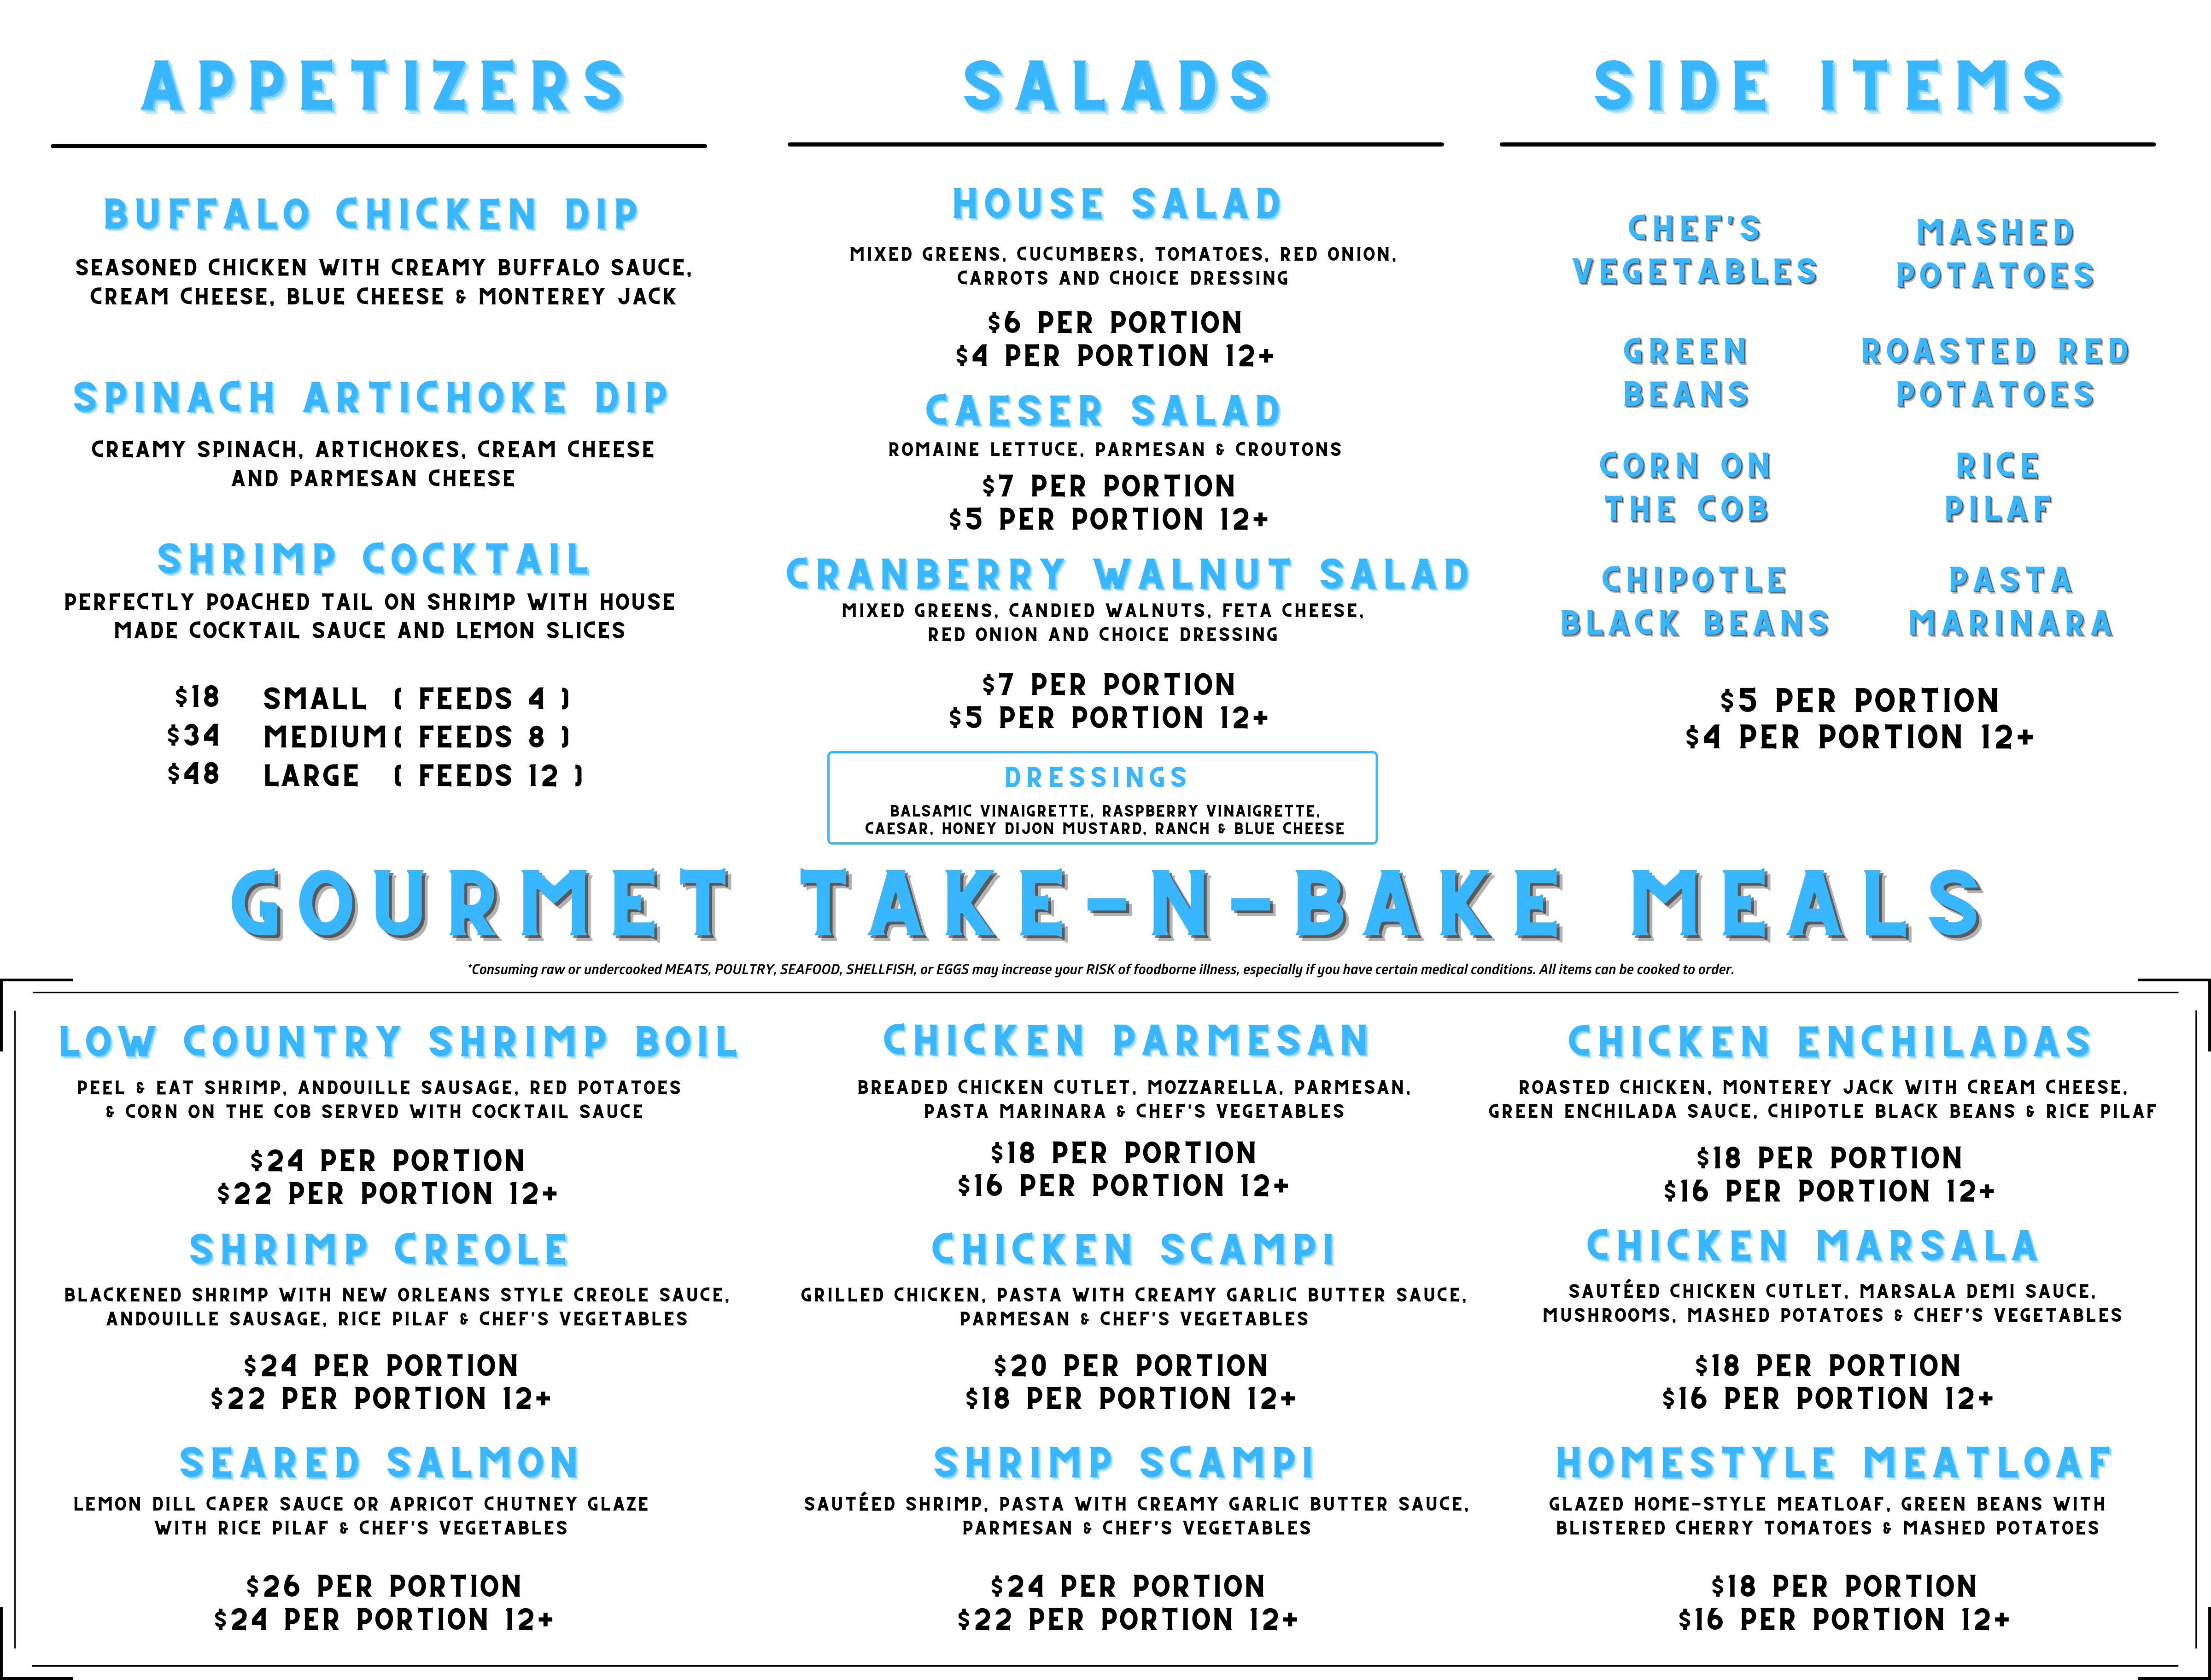 Menu with sections for appetizers, salads, side items, and gourmet take-n-bake meals. Items include various dips, seafood, salads, and meals like shrimp scampi, chicken bake, and buffalo enchiladas. Prices listed.